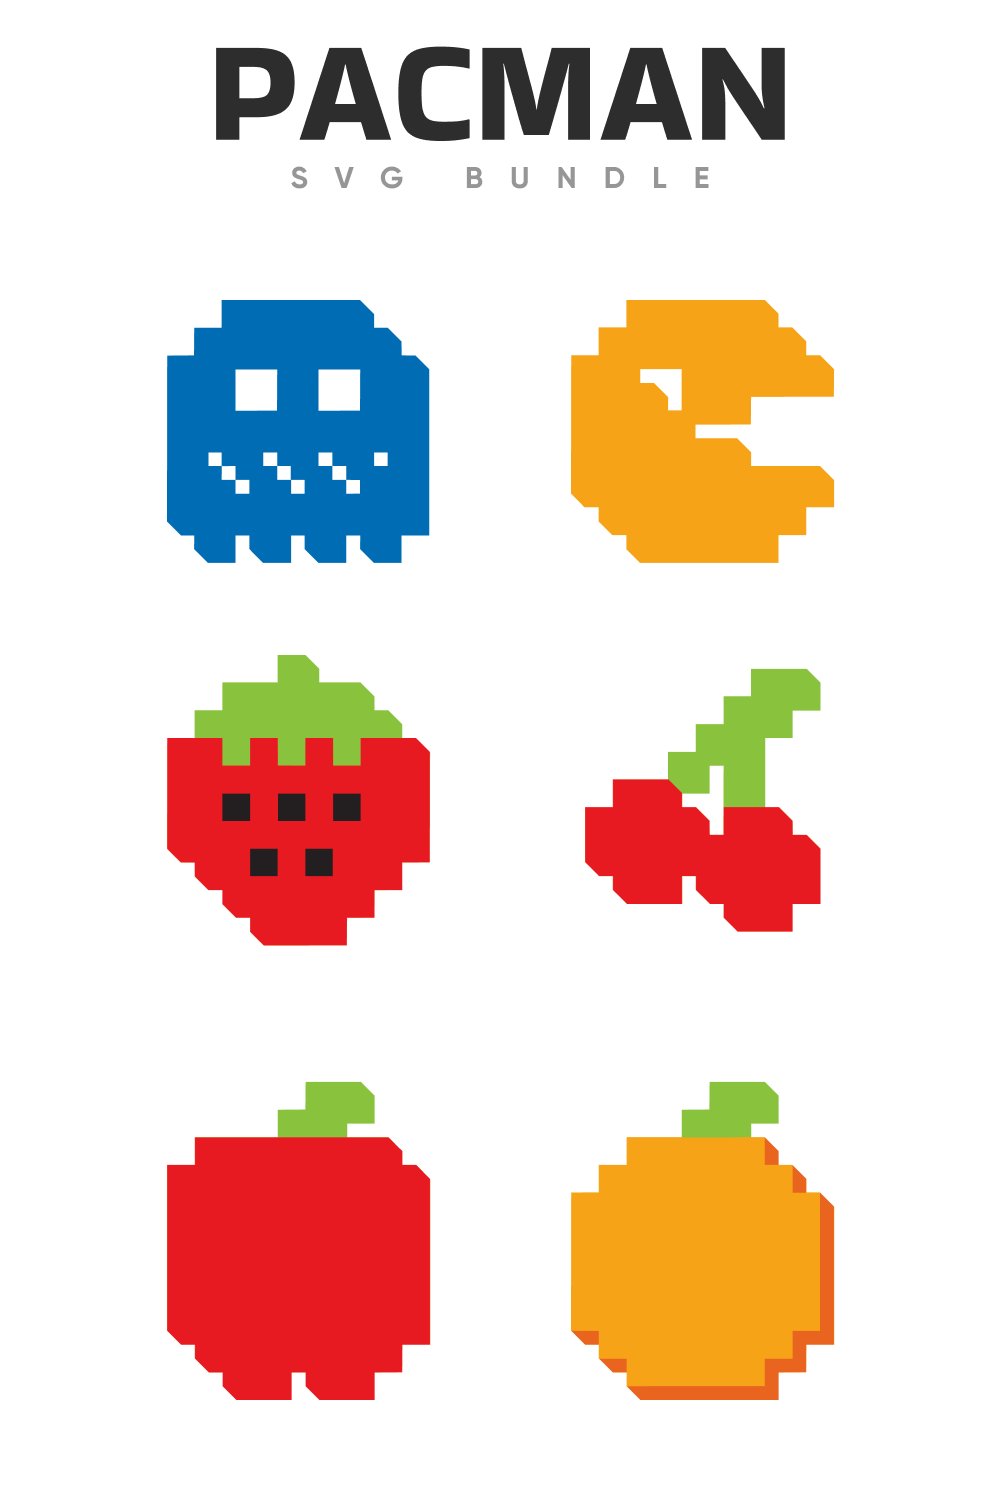 Fruits in a pacman style.